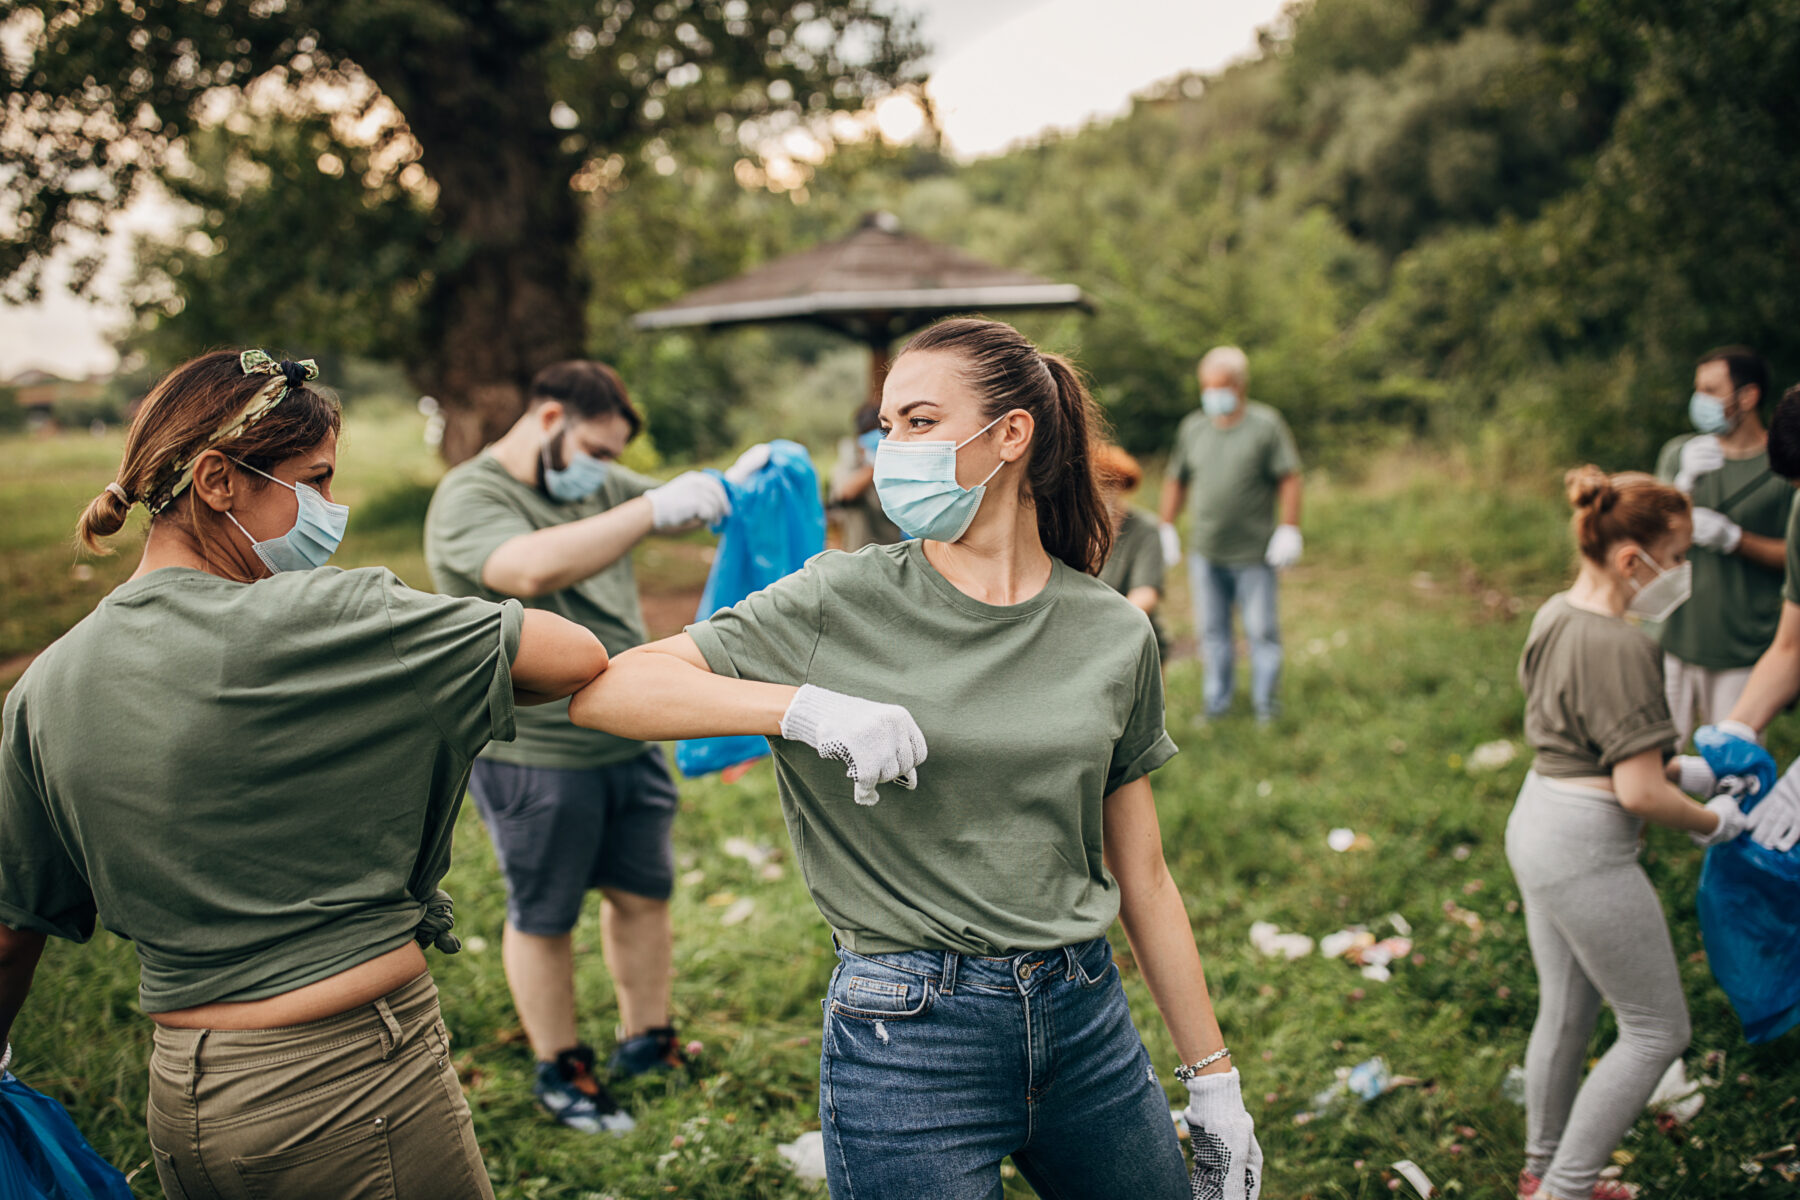 Group of people, cleaning together in public park, saving the environment together, all of them are wearing surgical masks due to coronavirus.